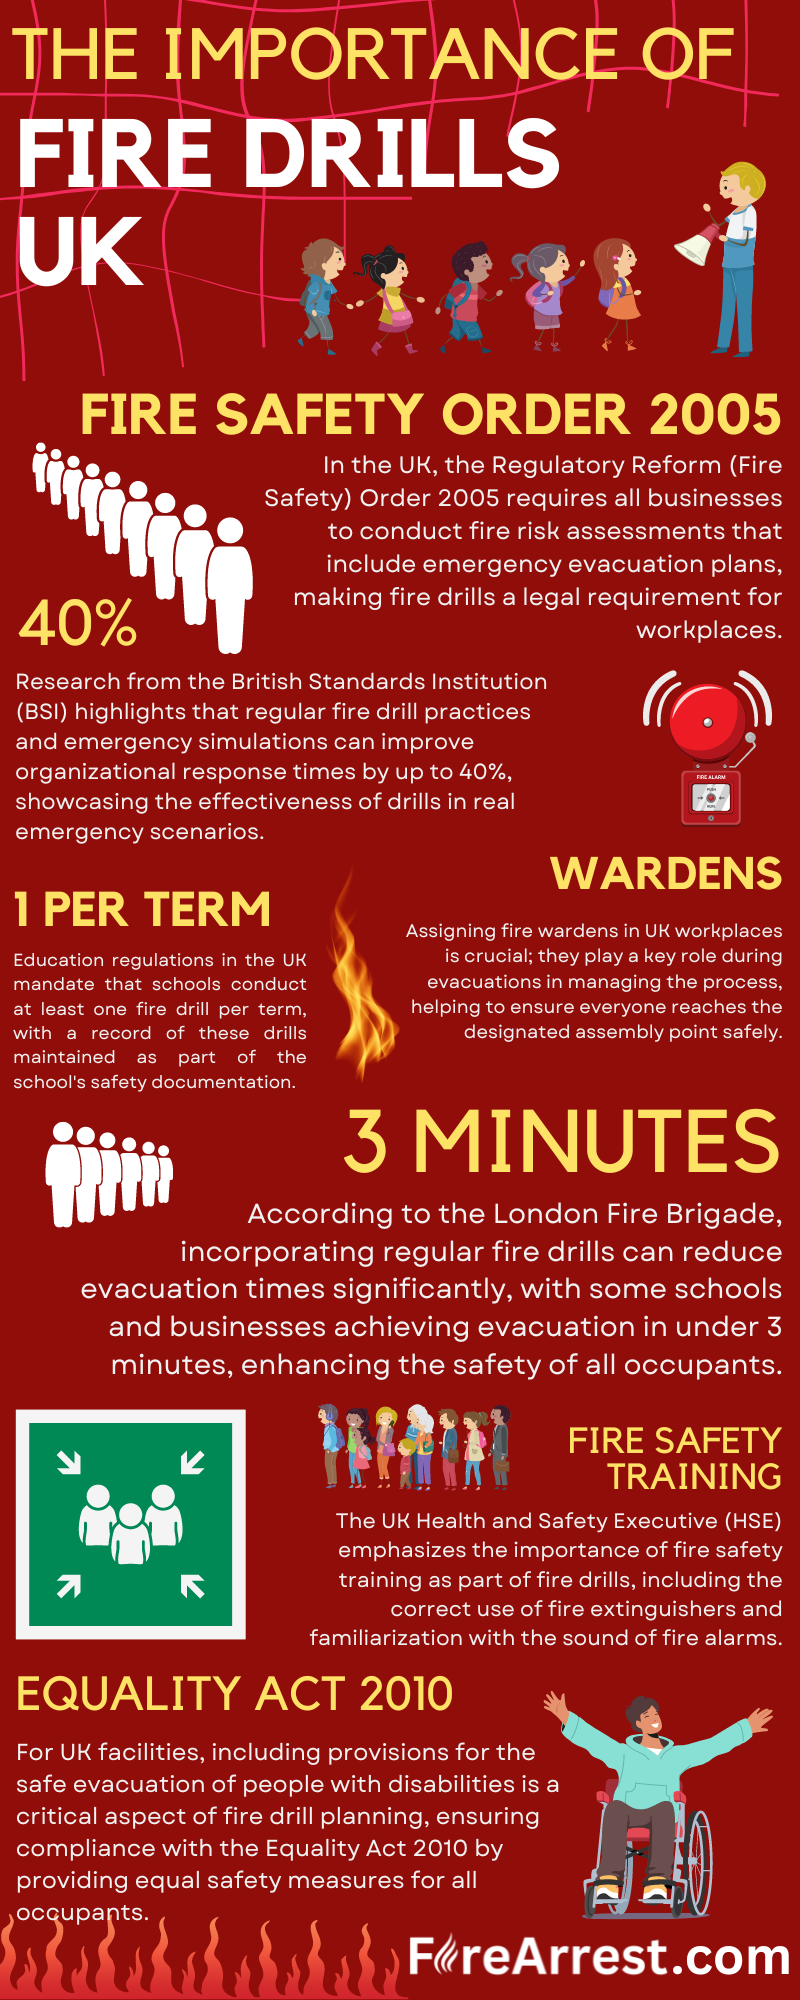 The Importance of Fire Drills UK Infographic